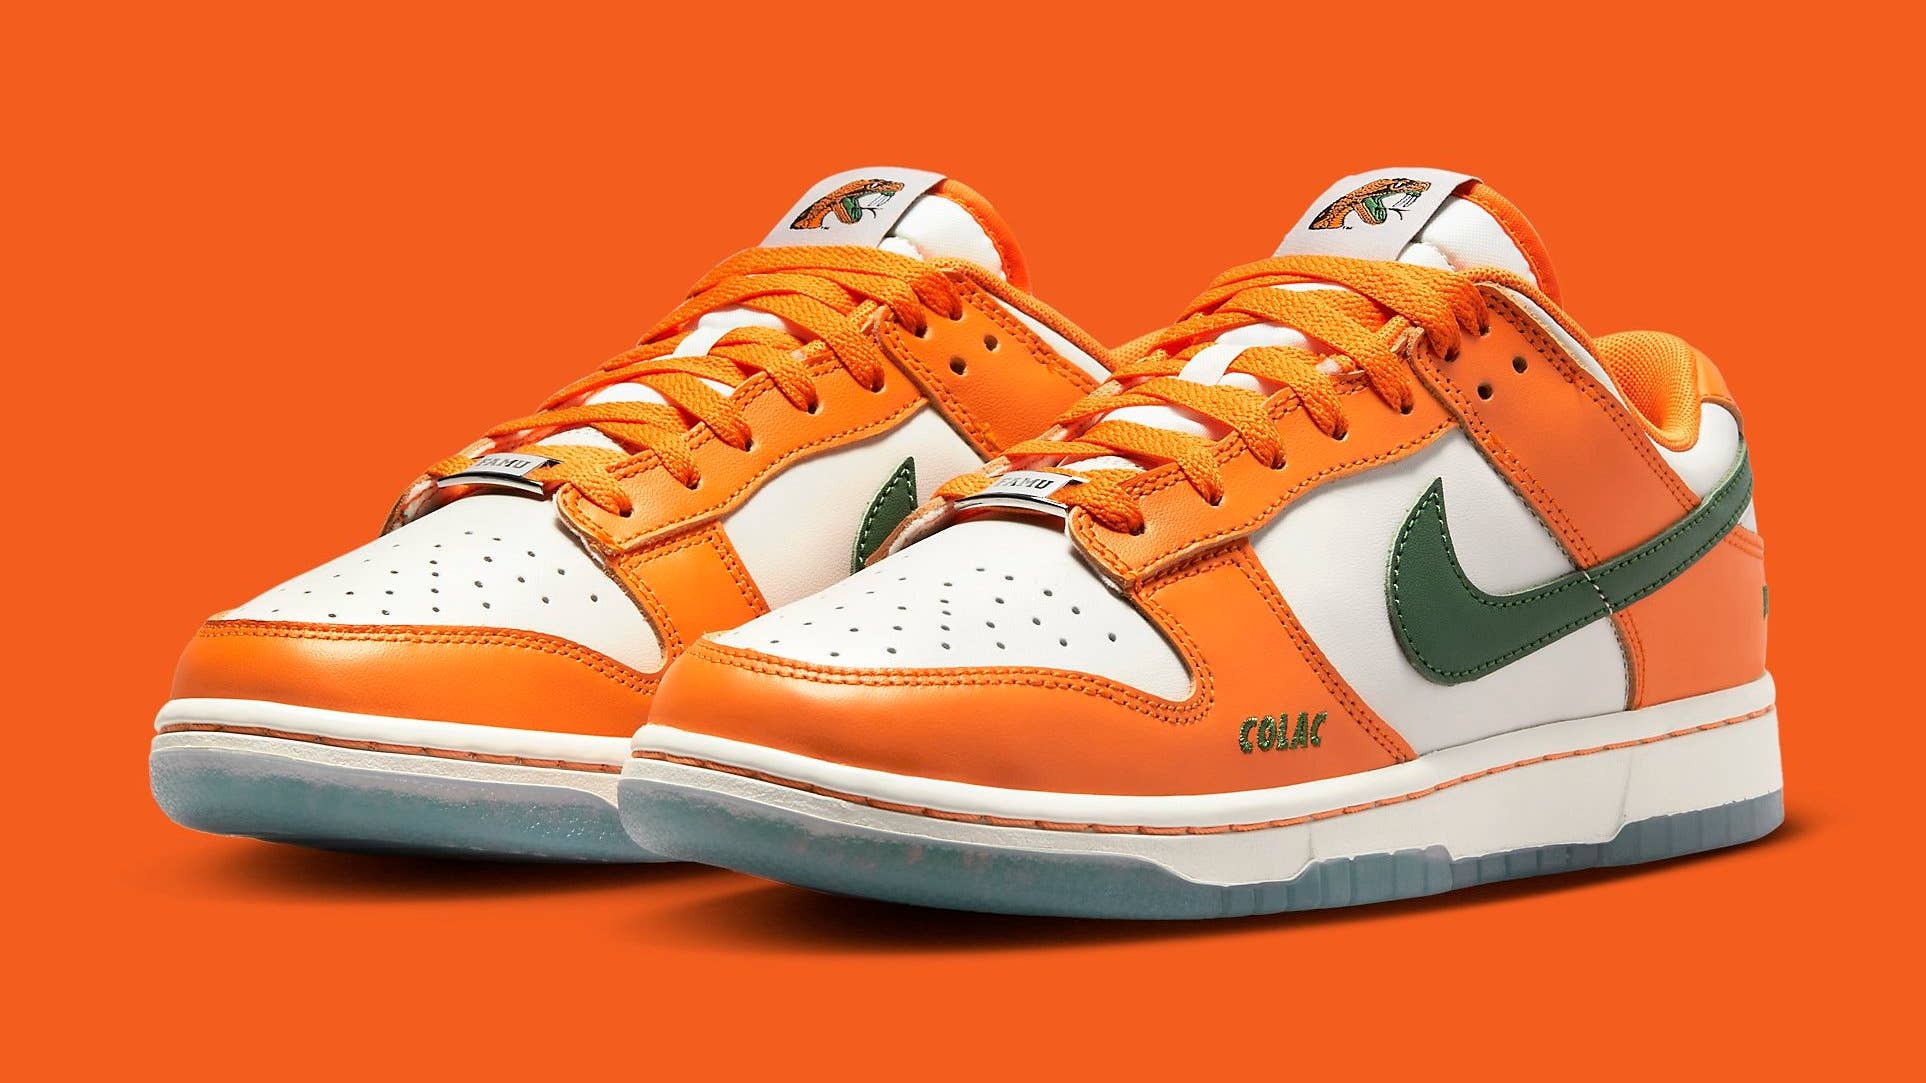 Florida A&M Gets Its Own Nike Dunk Colorway